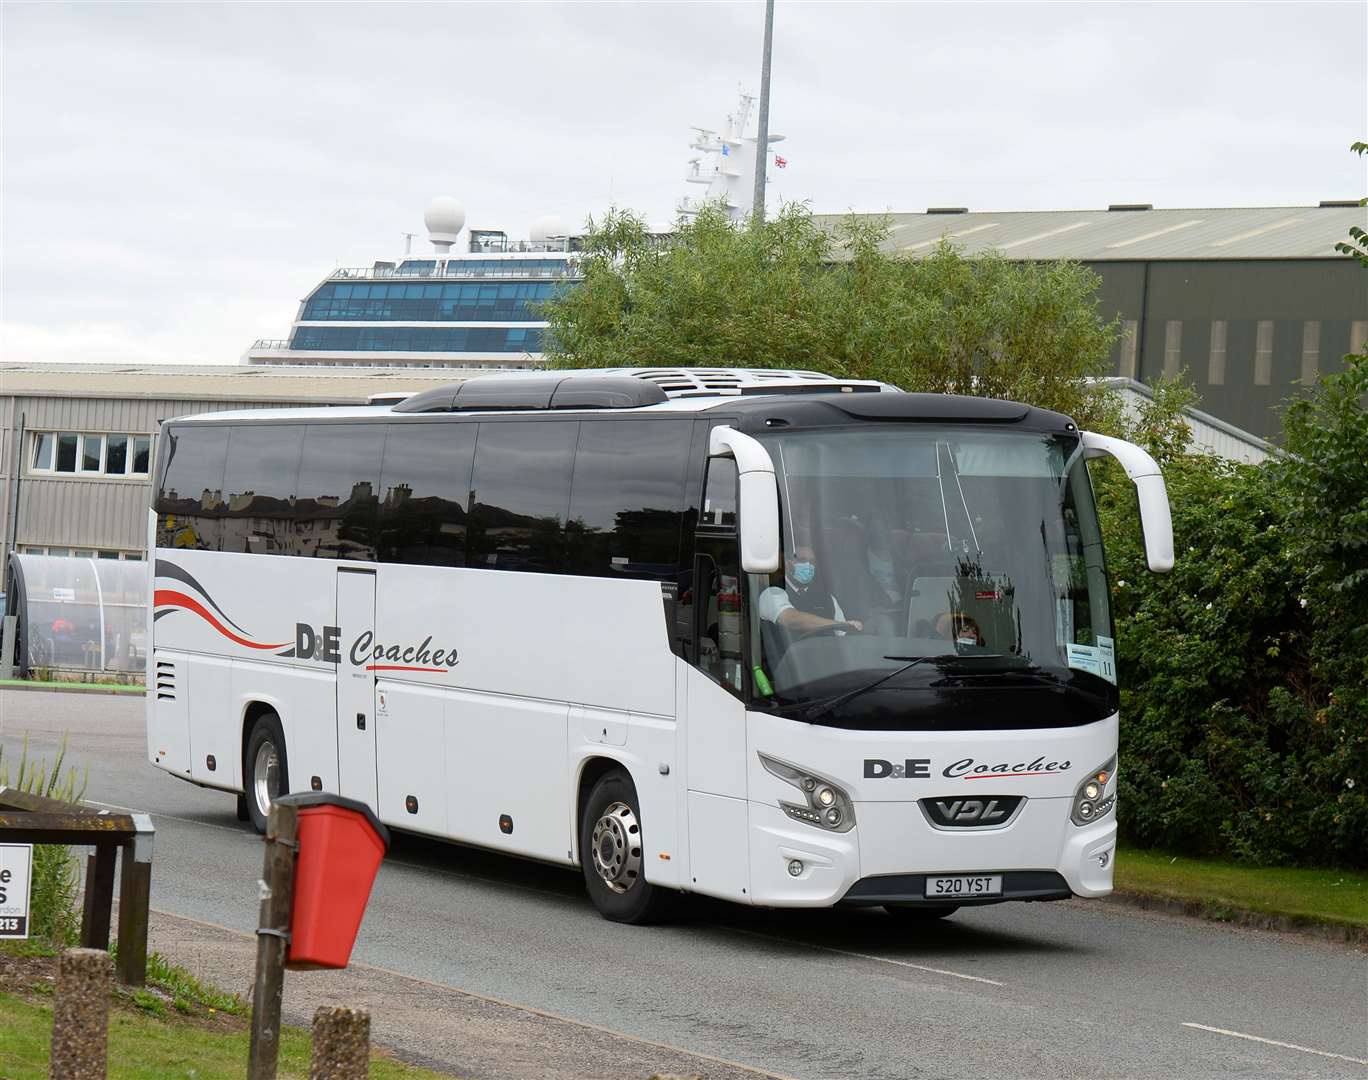 D&E Coaches take away passengers on excursions to sites across the region. Picture: Gary Anthony